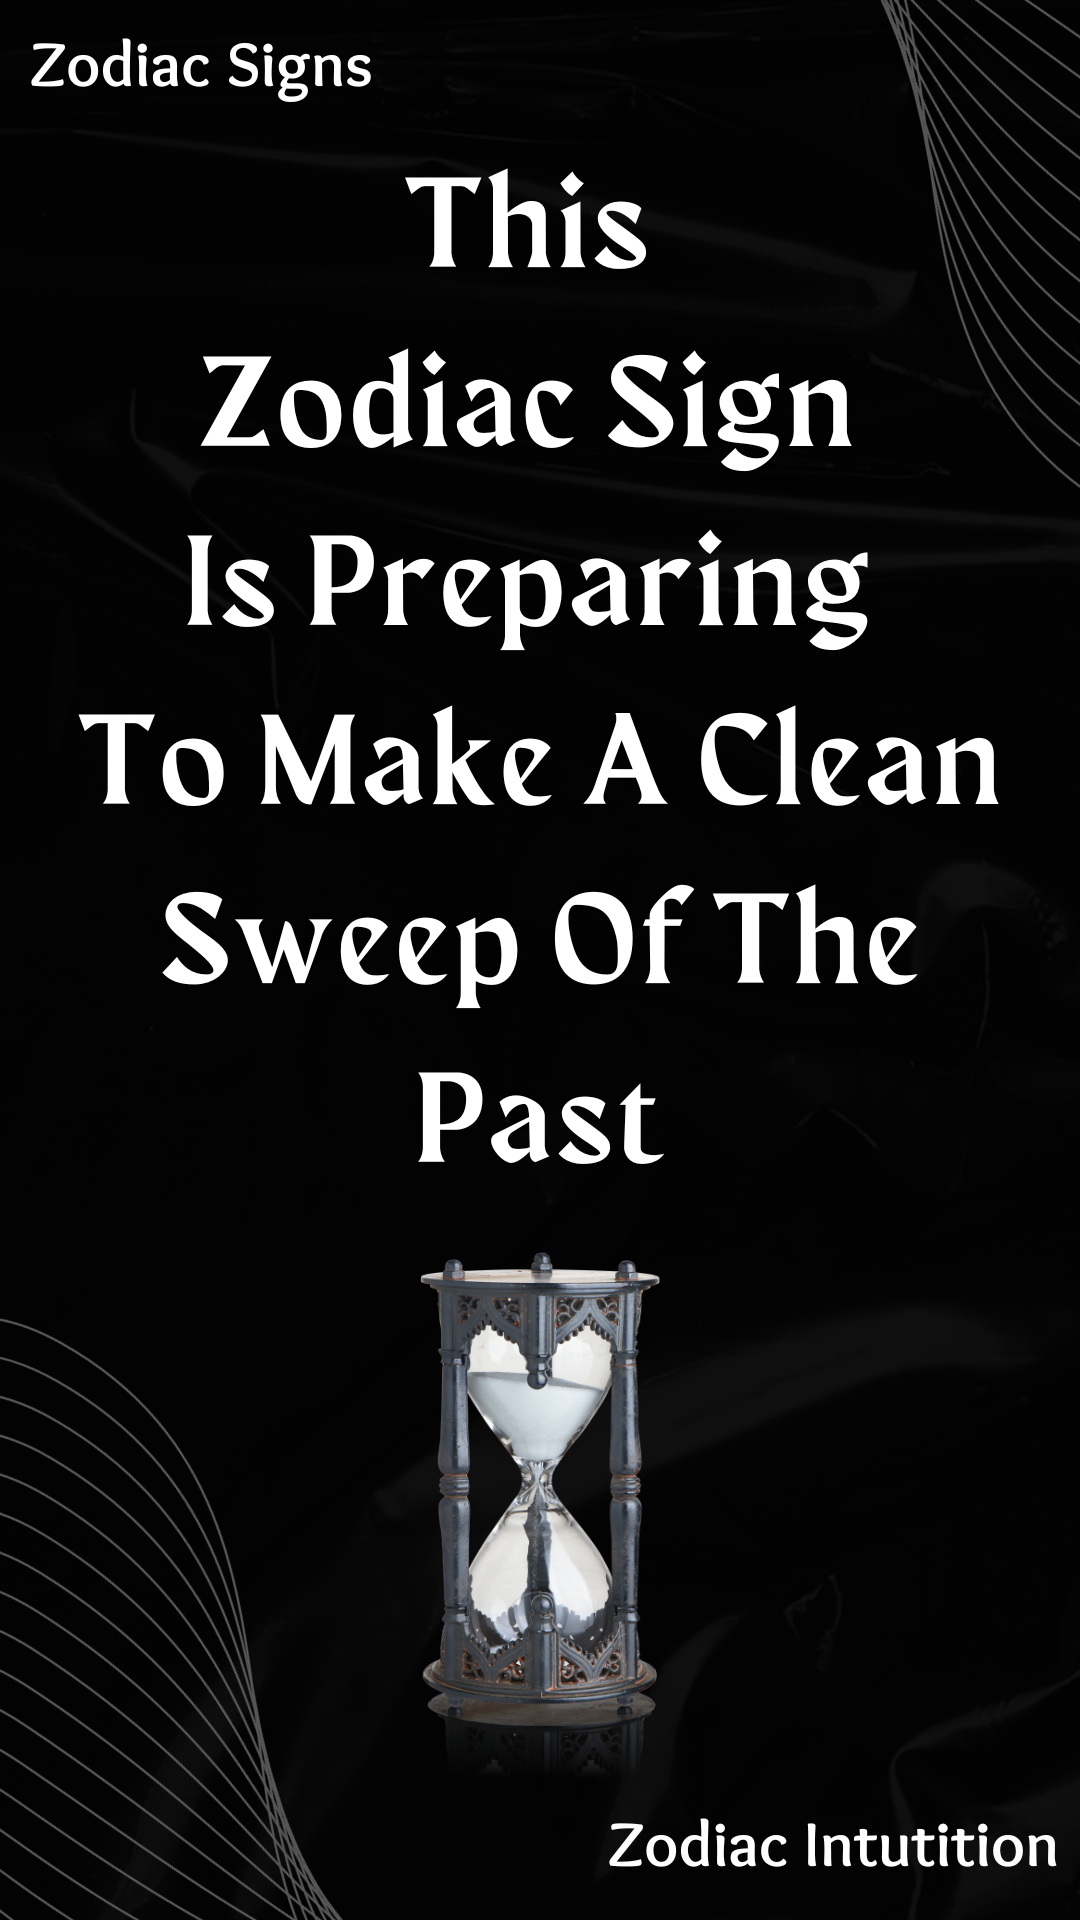 This Zodiac Sign Is Preparing To Make A Clean Sweep Of The Past